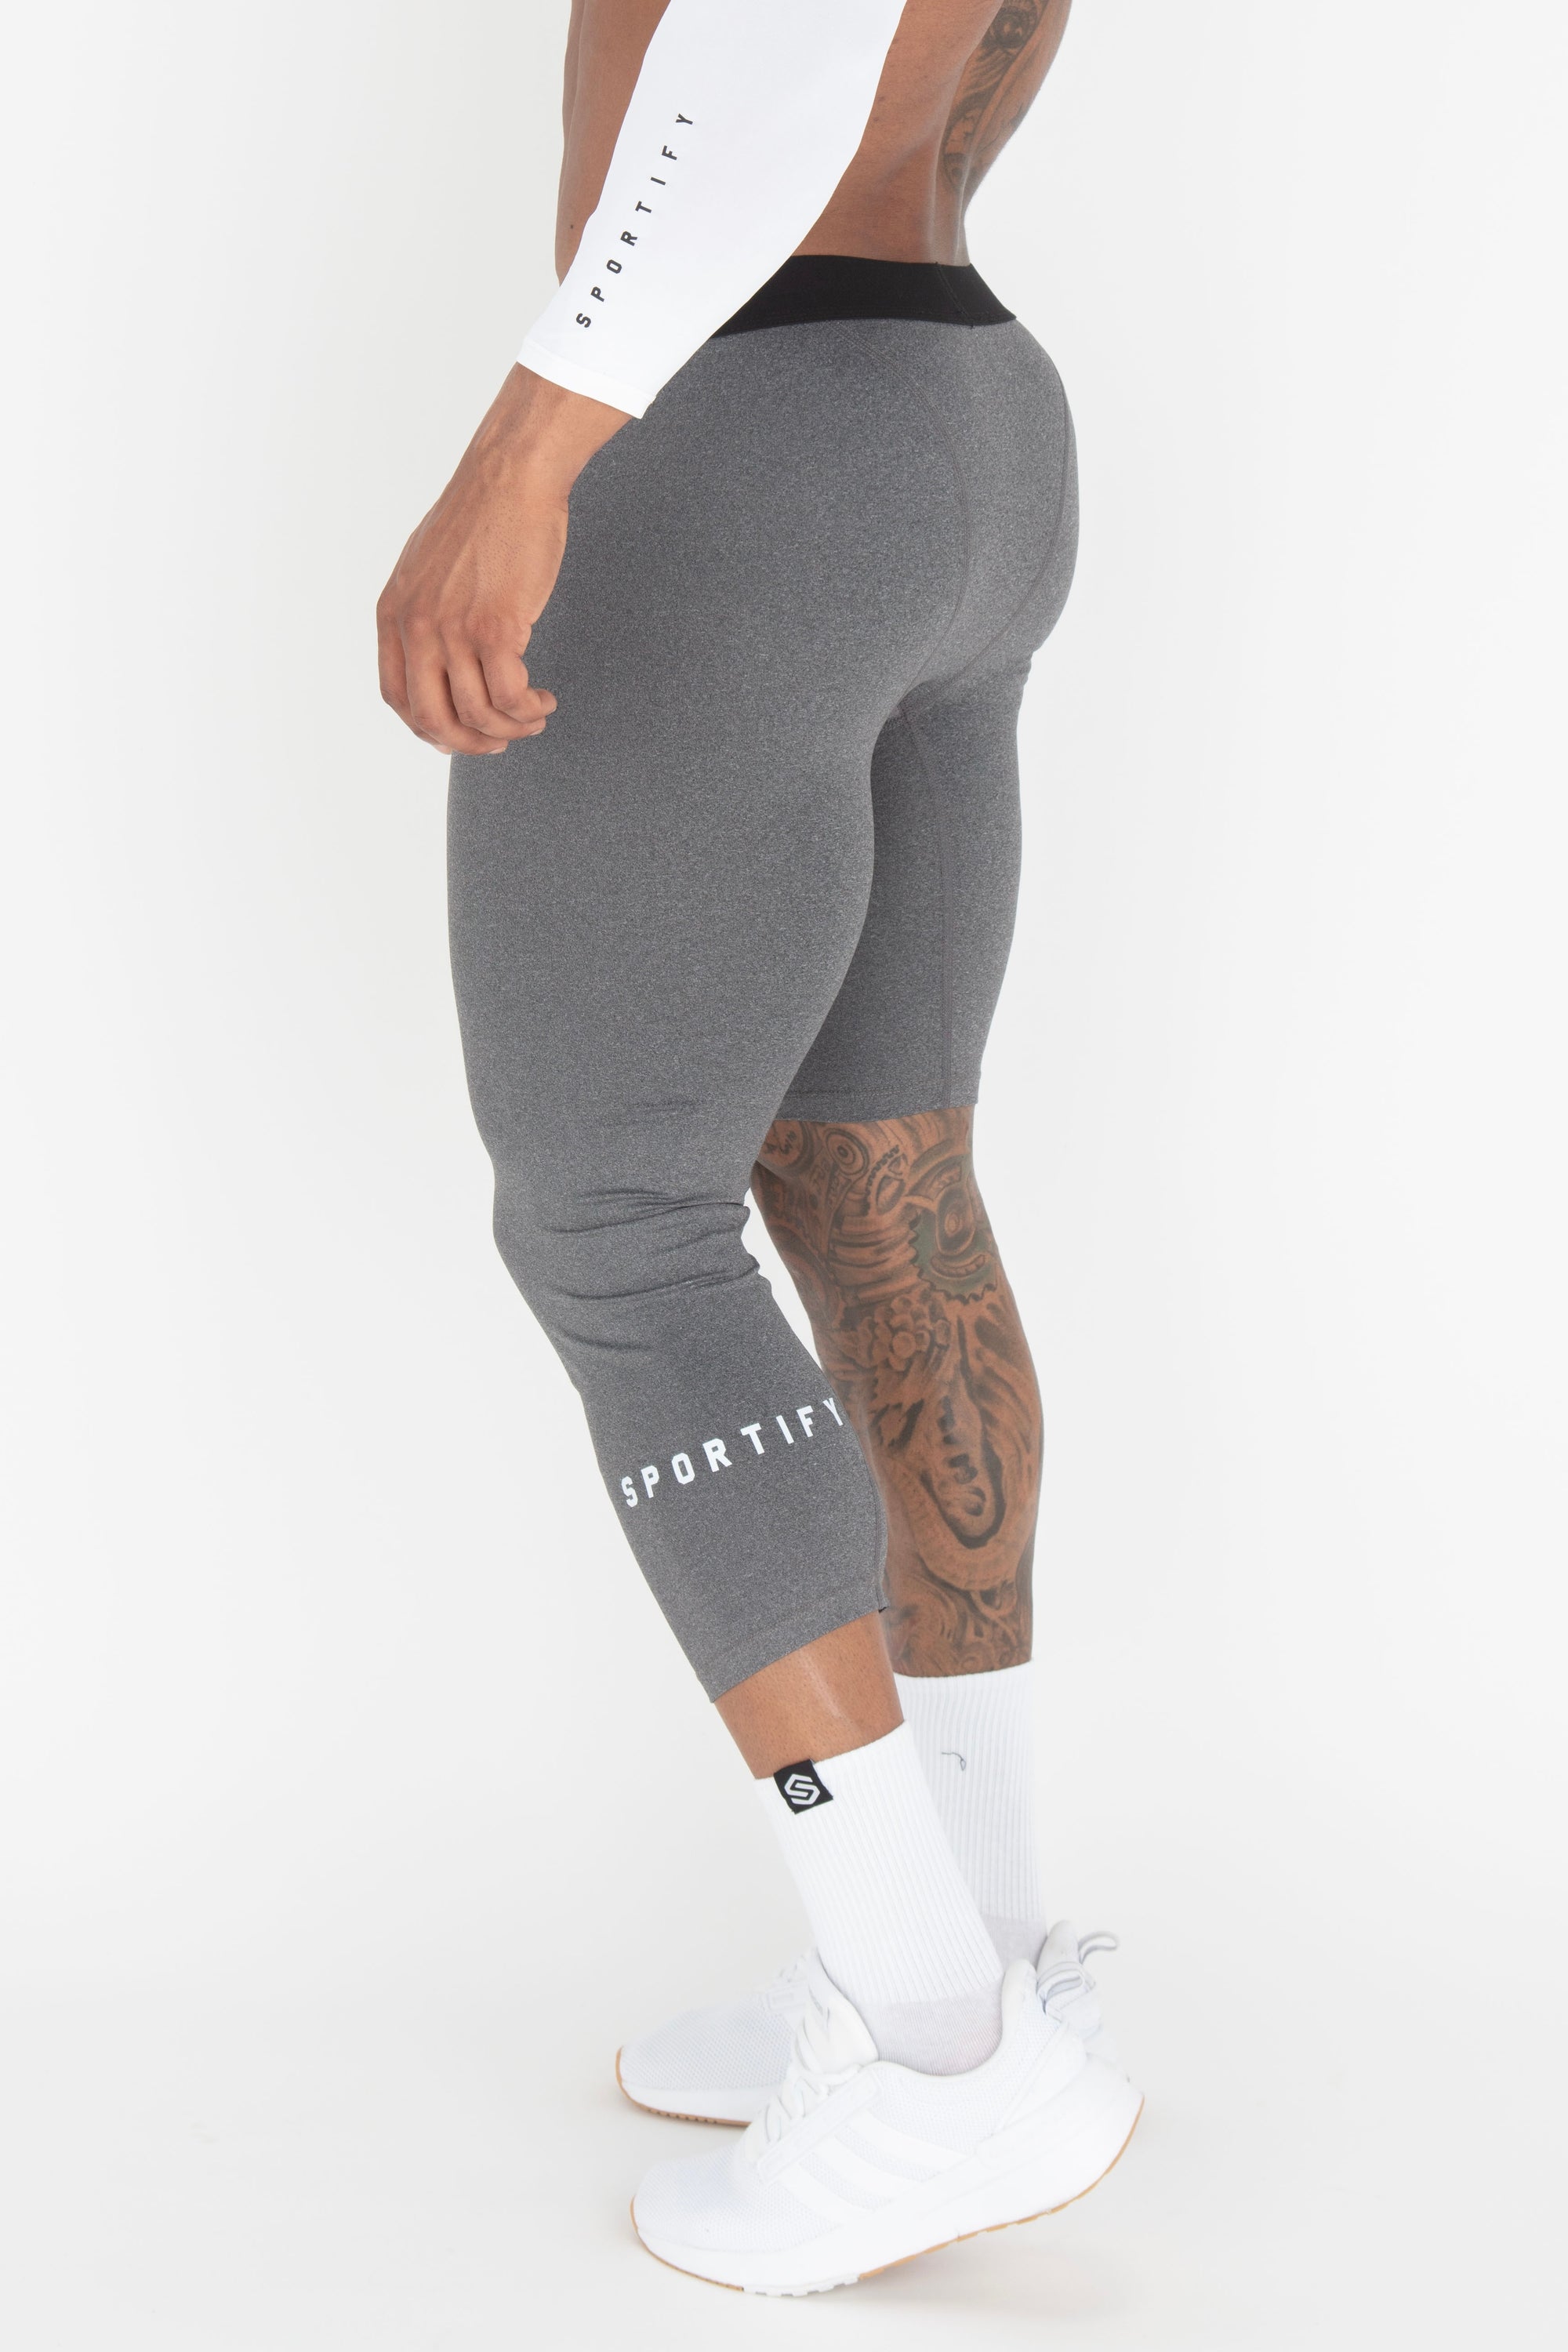 Velocity Leggings in Forest Grey – GYM SQUAD ACTIVE